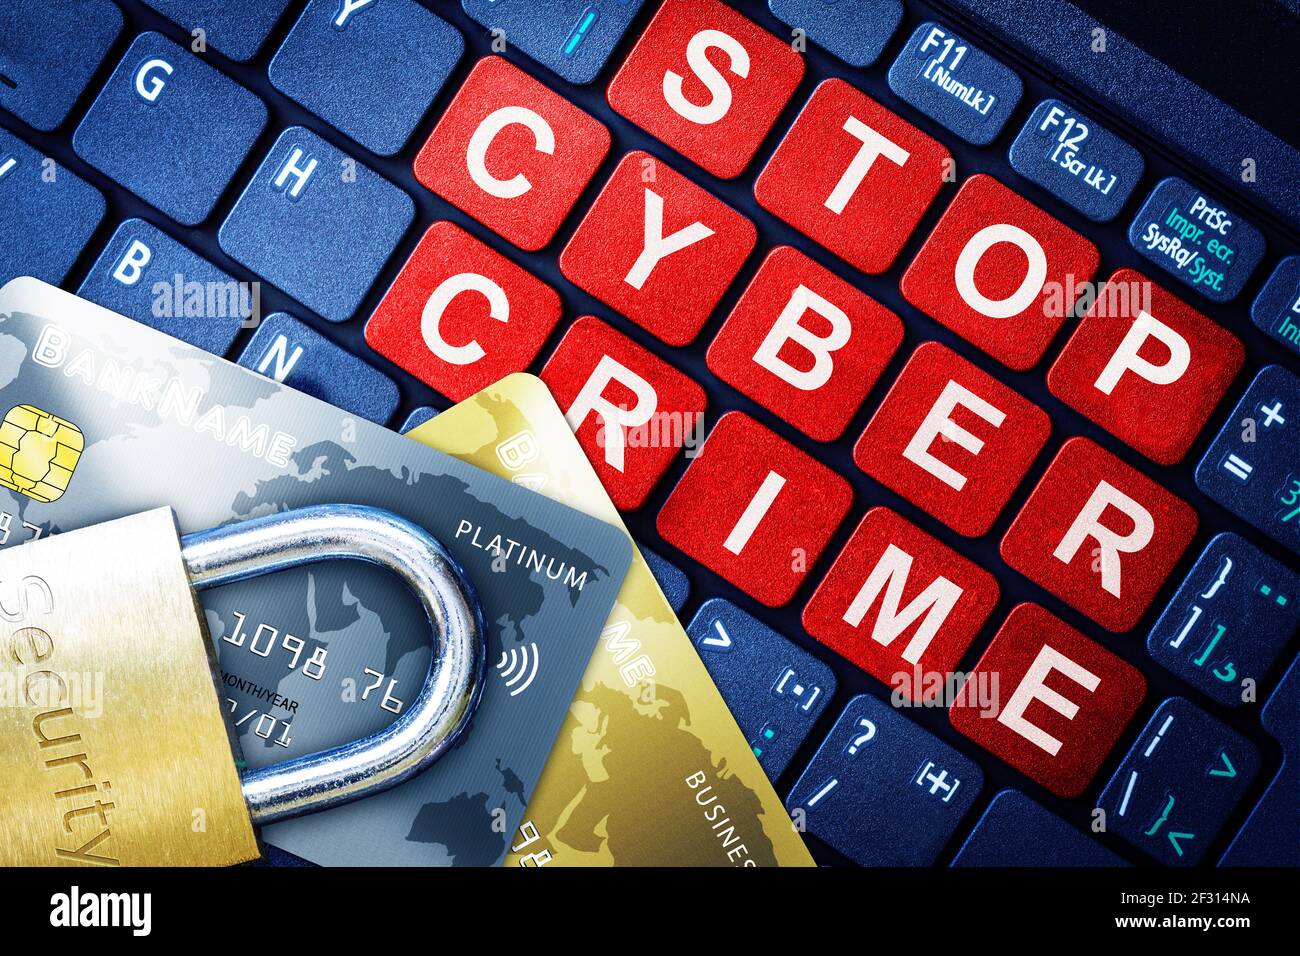 Stop Cyber Crime in red keys on high-tech computer keyboard background with security engraved lock on fake credit cards. Concept of Internet security, Stock Photo